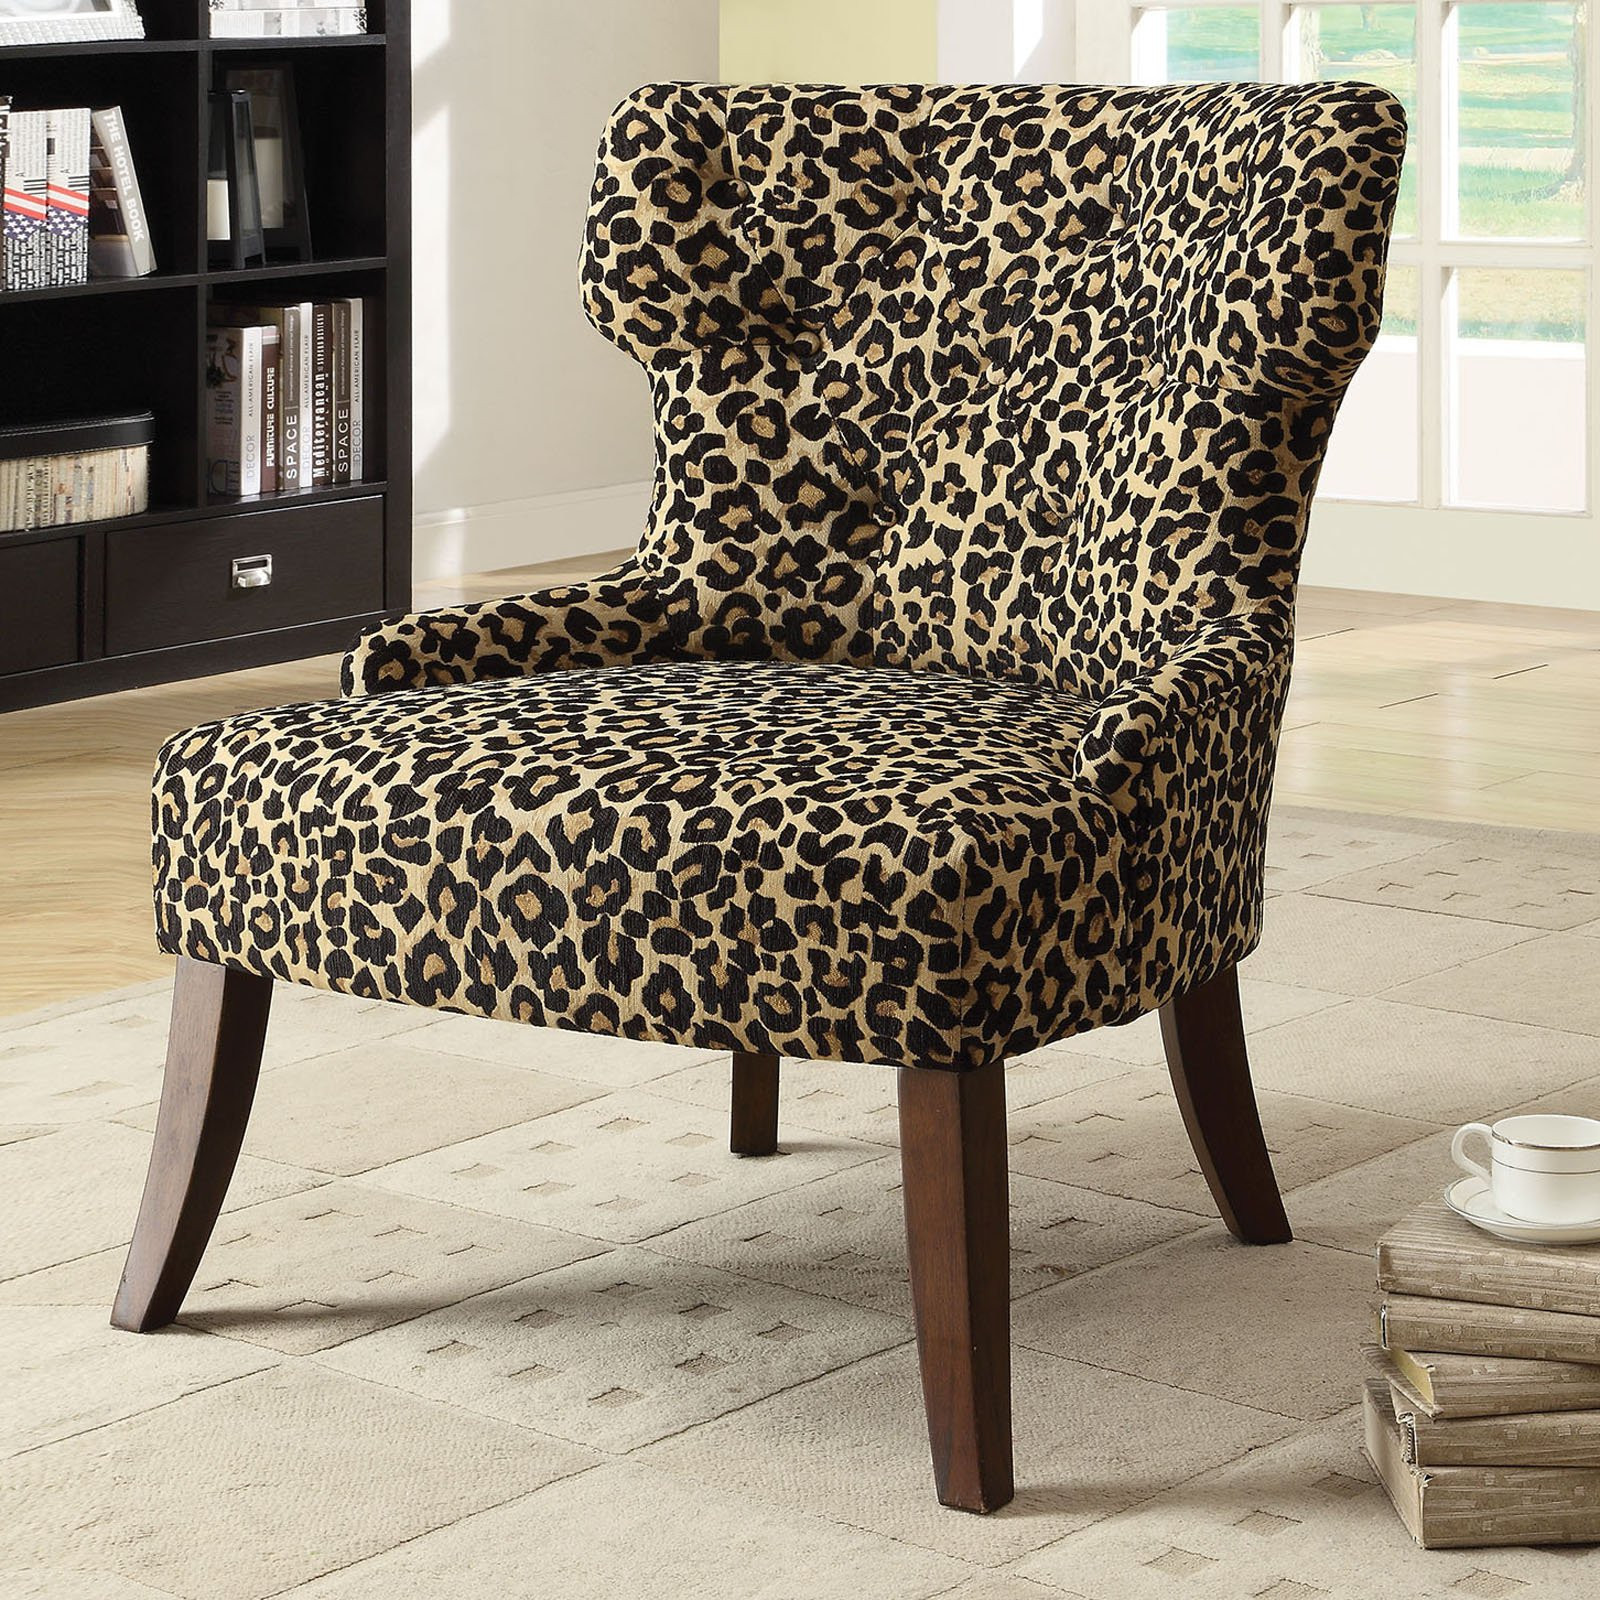 Printed Living Room Chairs
 Acme Furniture Claribel Accent Chair Leopard Fabric